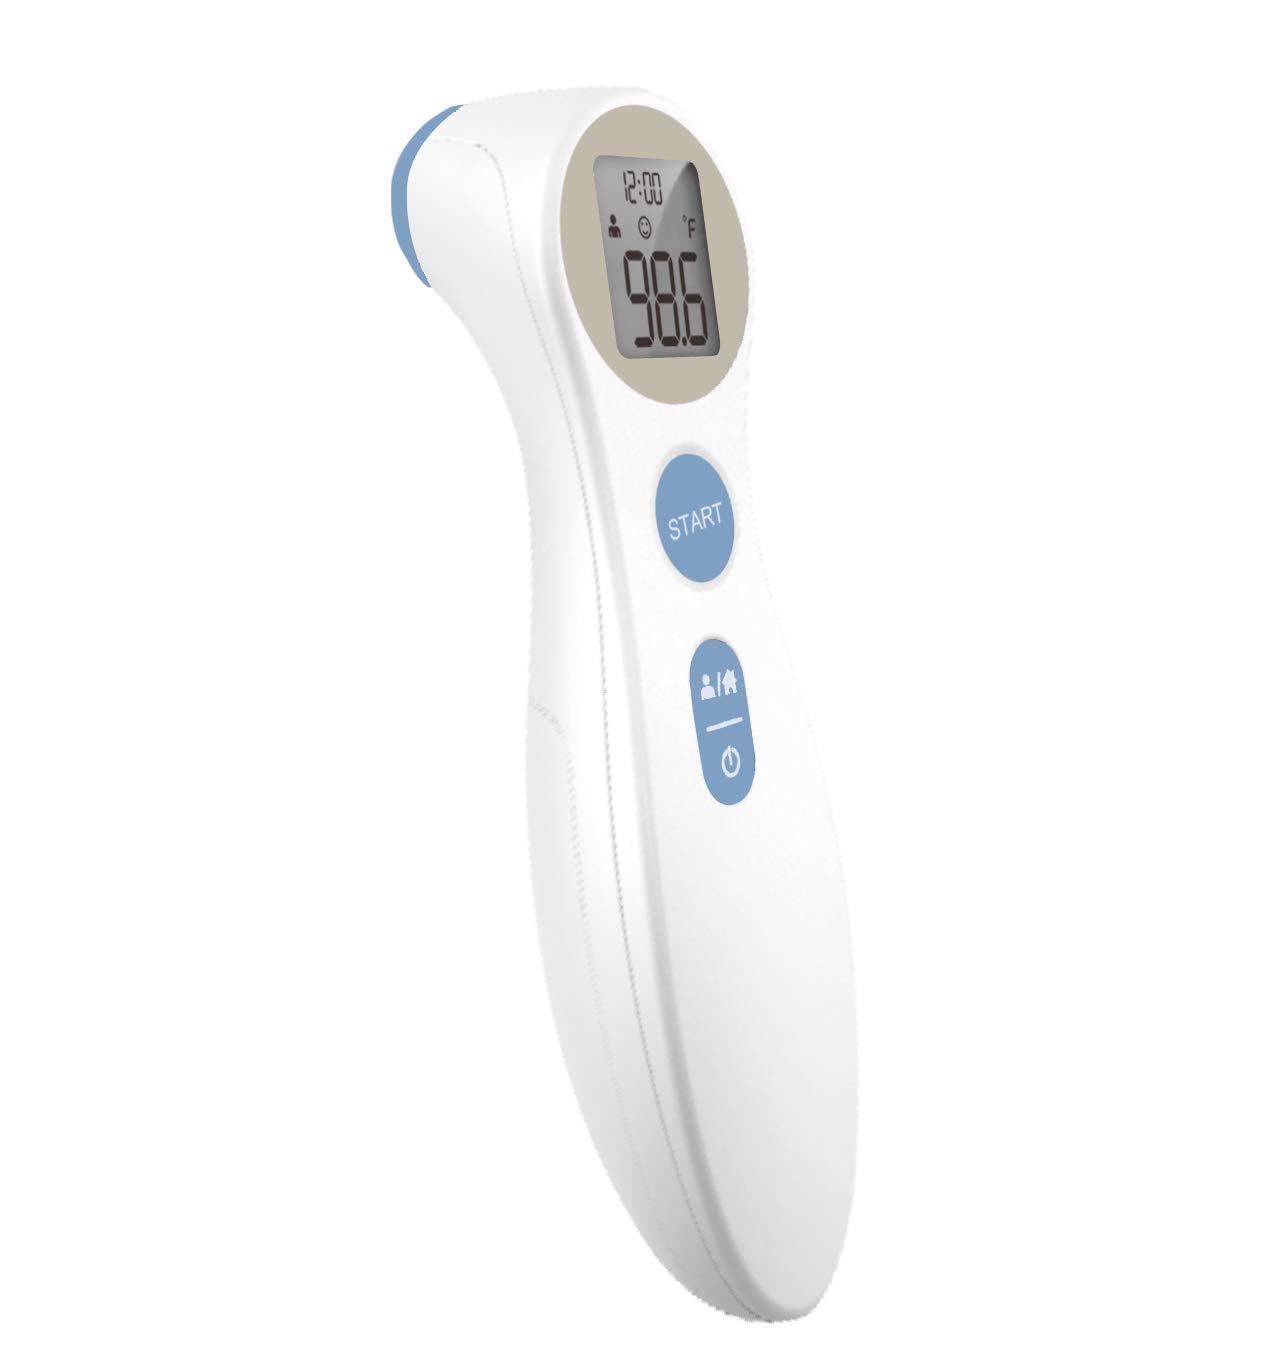 Digital Forehead Thermometer - Infrared - White (Body Temperature Reader, Lightweight, Compact)